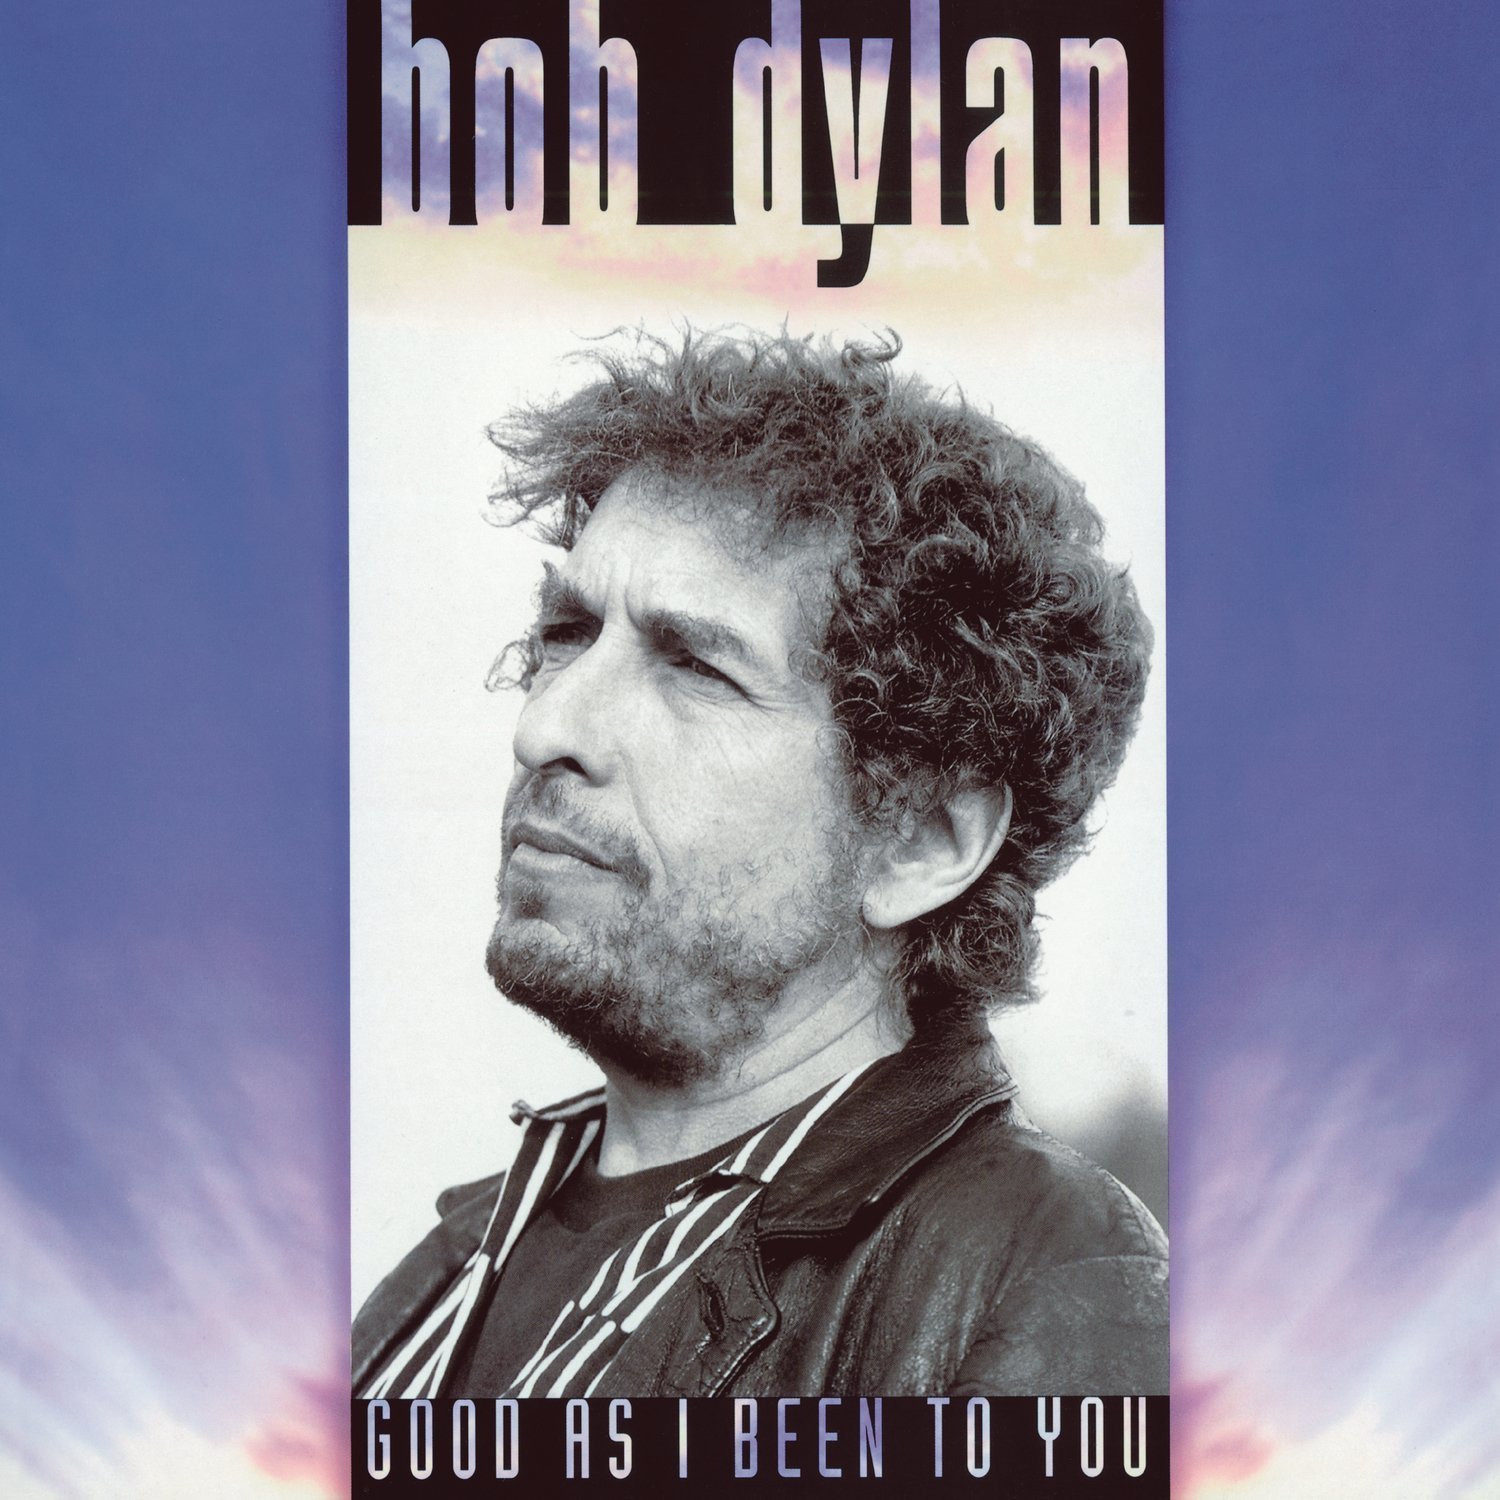 LP Bob Dylan Good As I Been To You (LP)